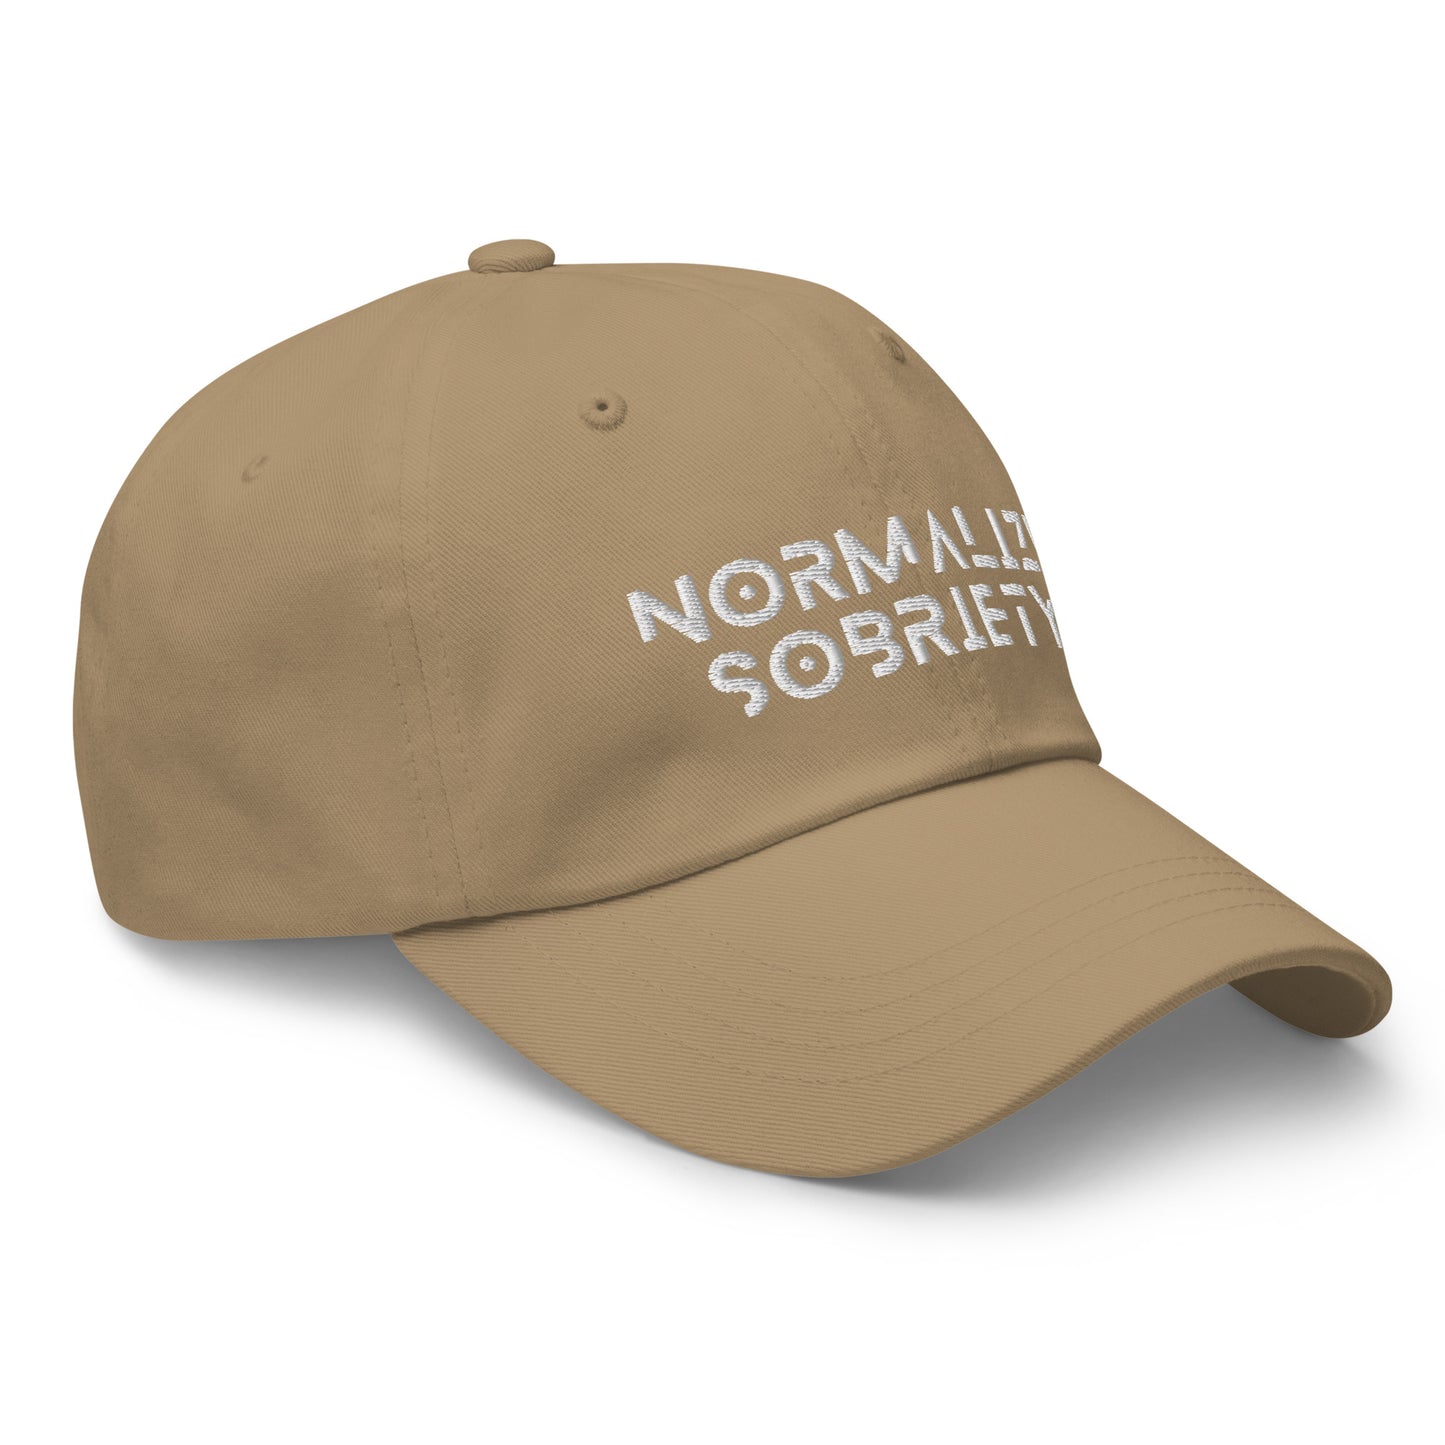 Normalize Sobriety Hat